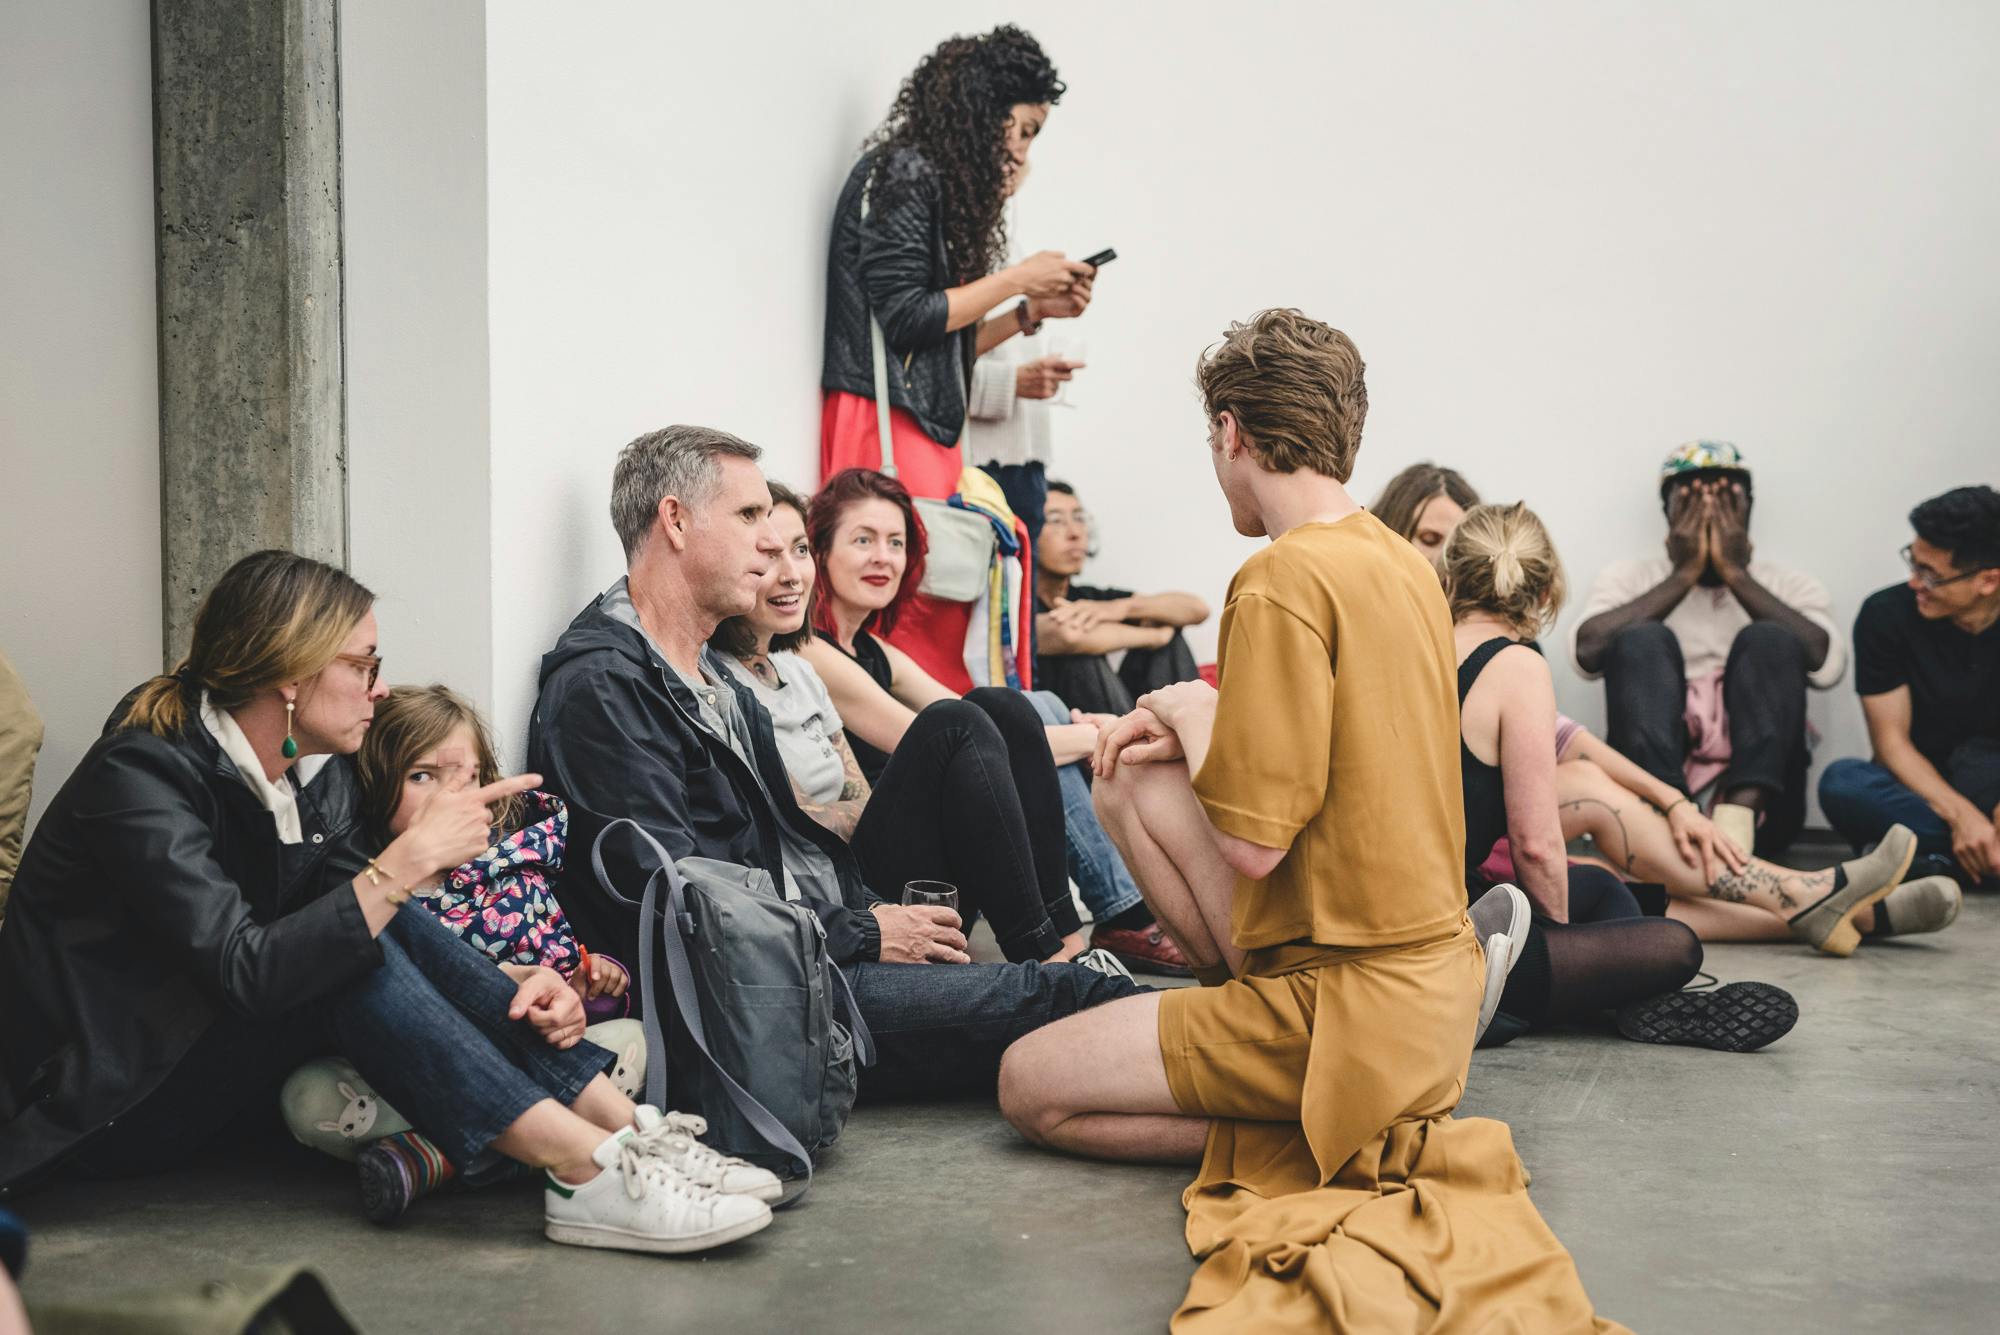 Andrew Bartee, wearing a mustard-coloured outfit is kneeling down on the gallery floor to talk to some of the audience sitting besides the walls. 